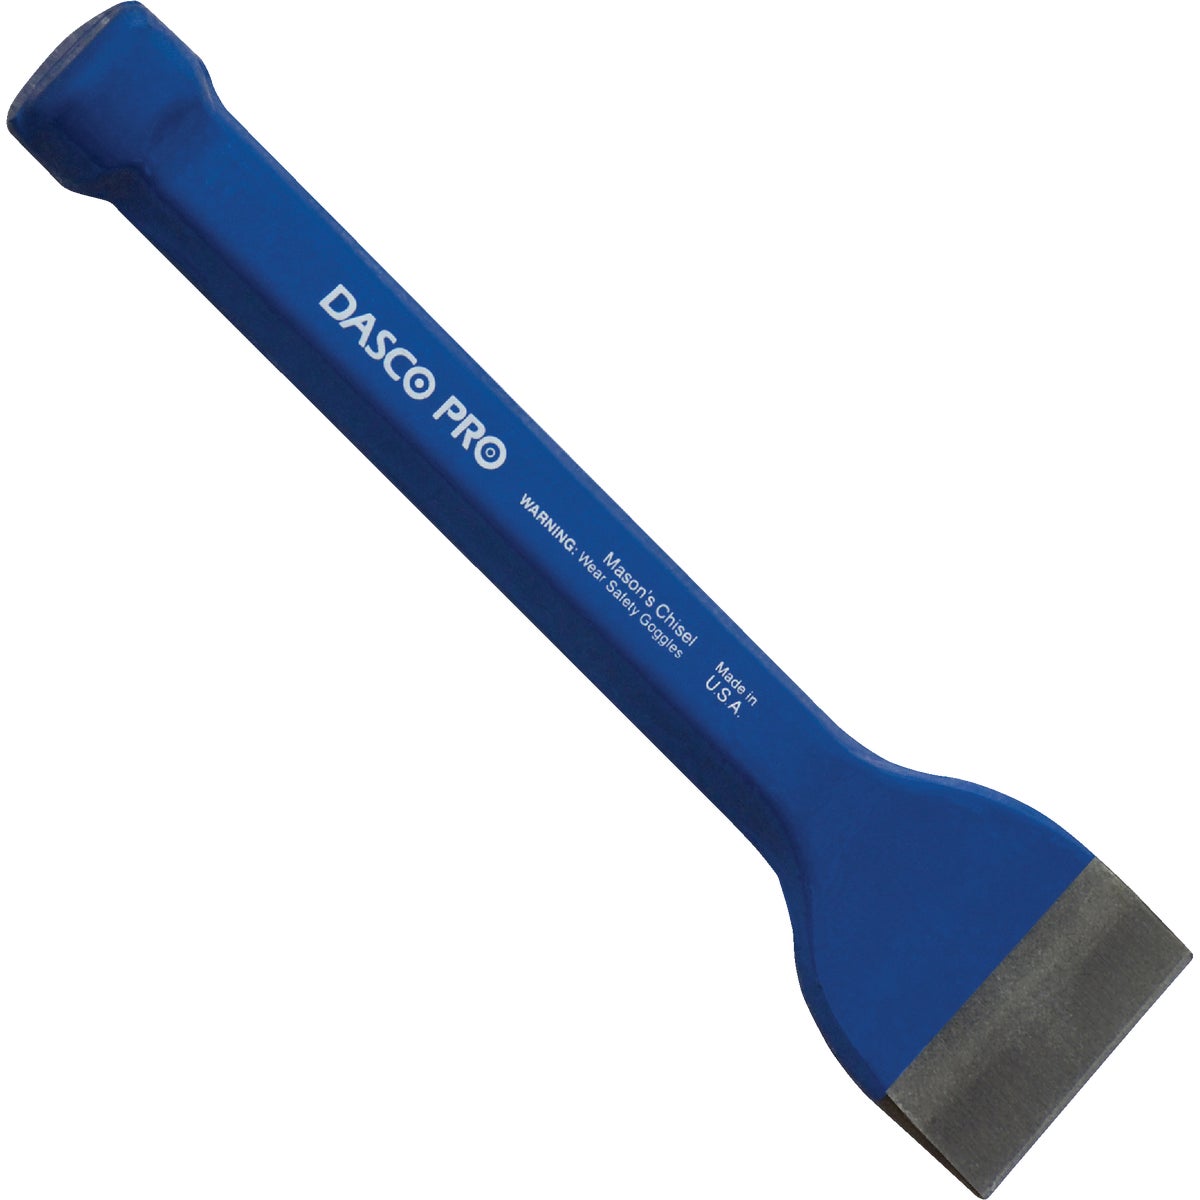 Item 340358, The Mayhew 35602 Mason Chisel, 1  x 7   is used in a multitude of masonry 